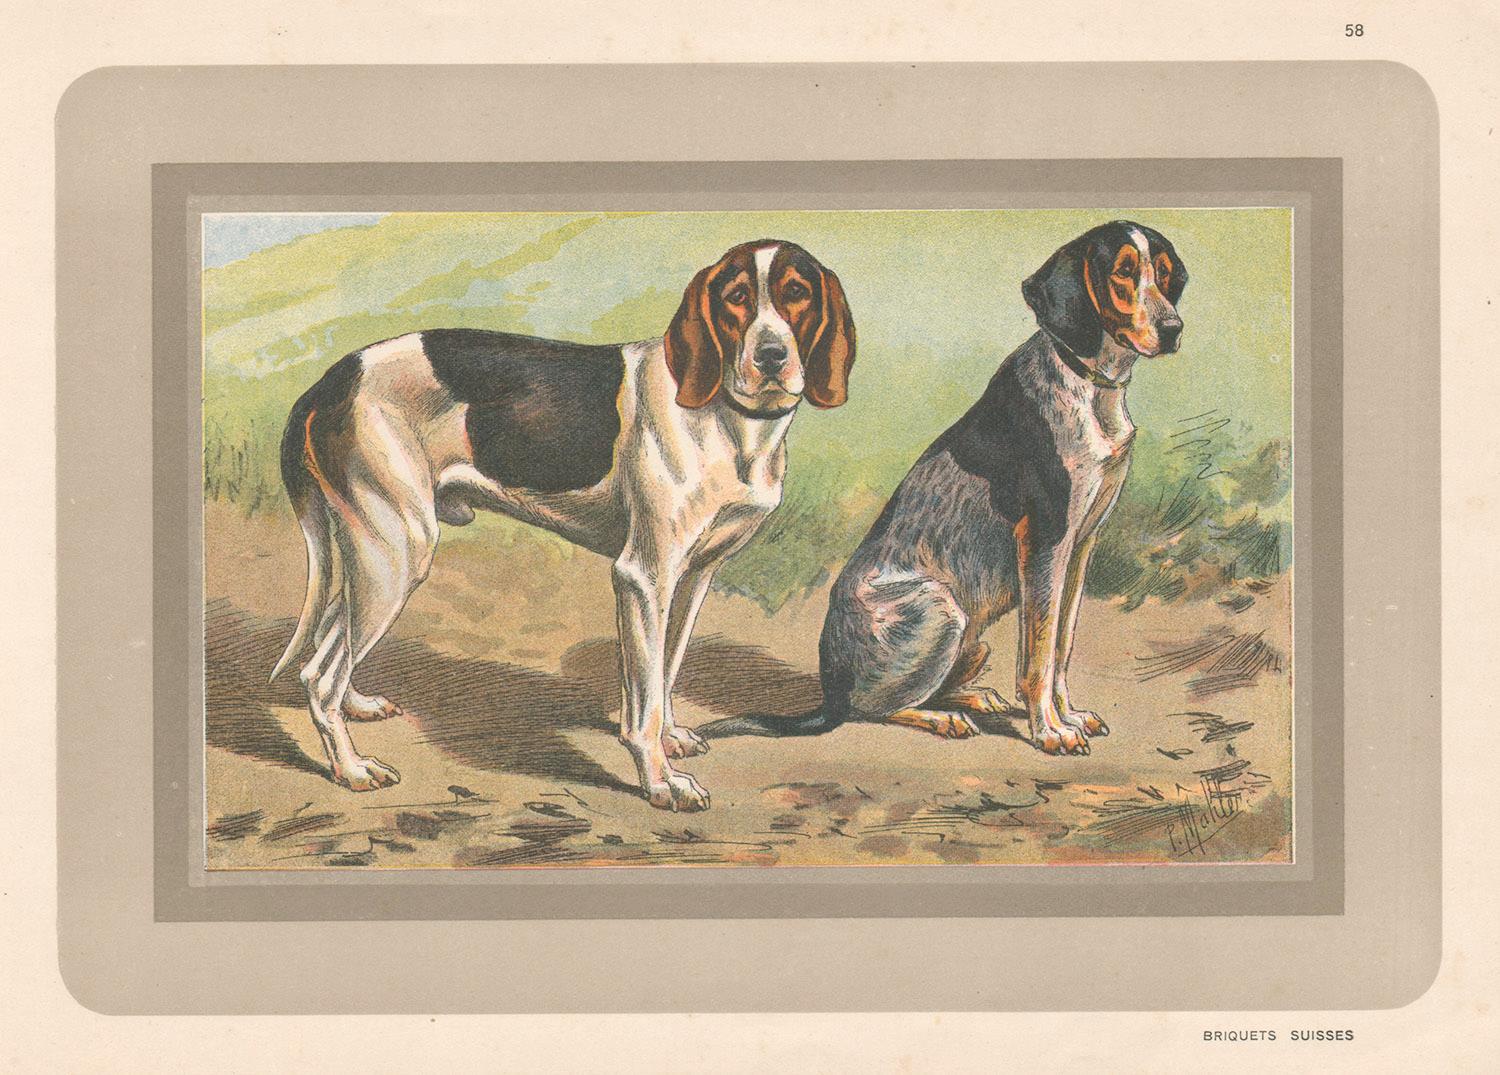 Unknown Animal Print - Briquets Suisses, French hound, dog chromolithograph, 1930s